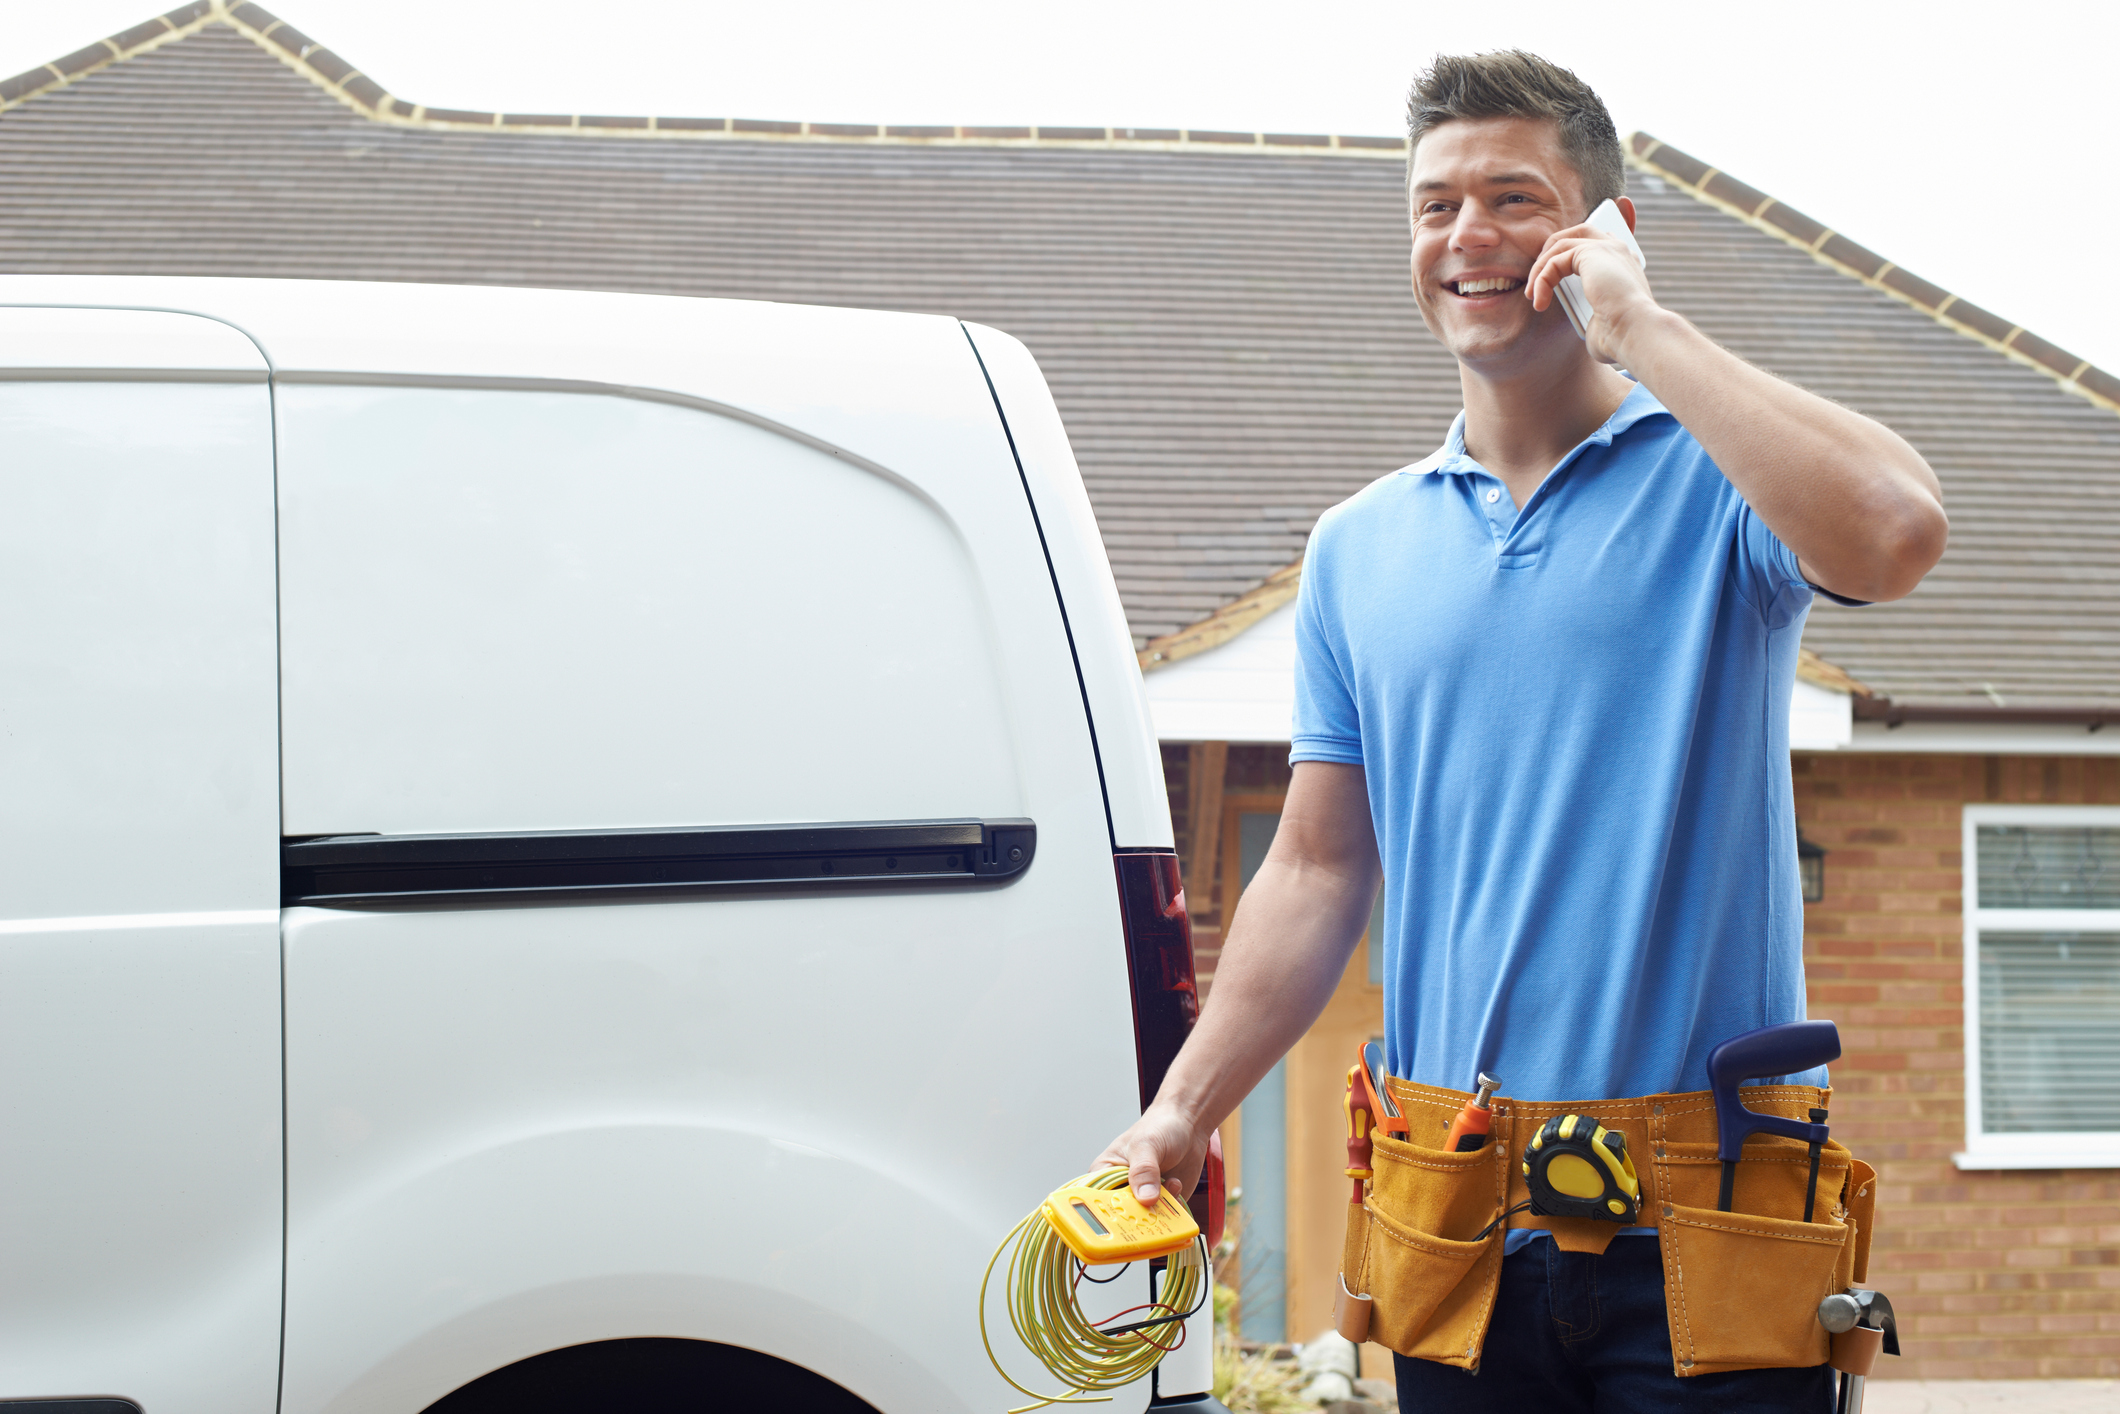 HVAC technician on the phone in front of a white work van in a residential neighborhood